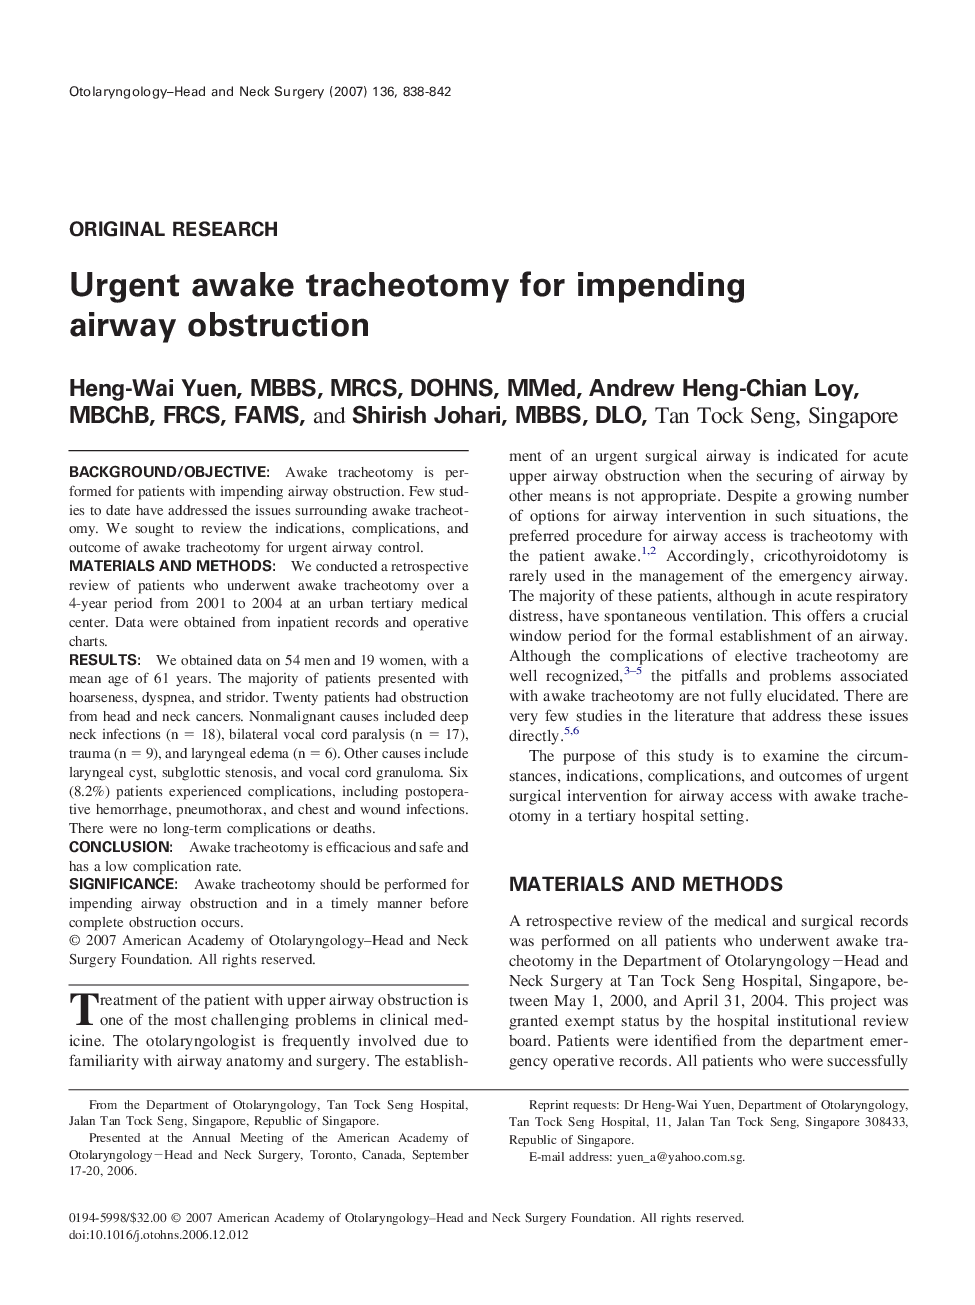 Urgent awake tracheotomy for impending airway obstruction